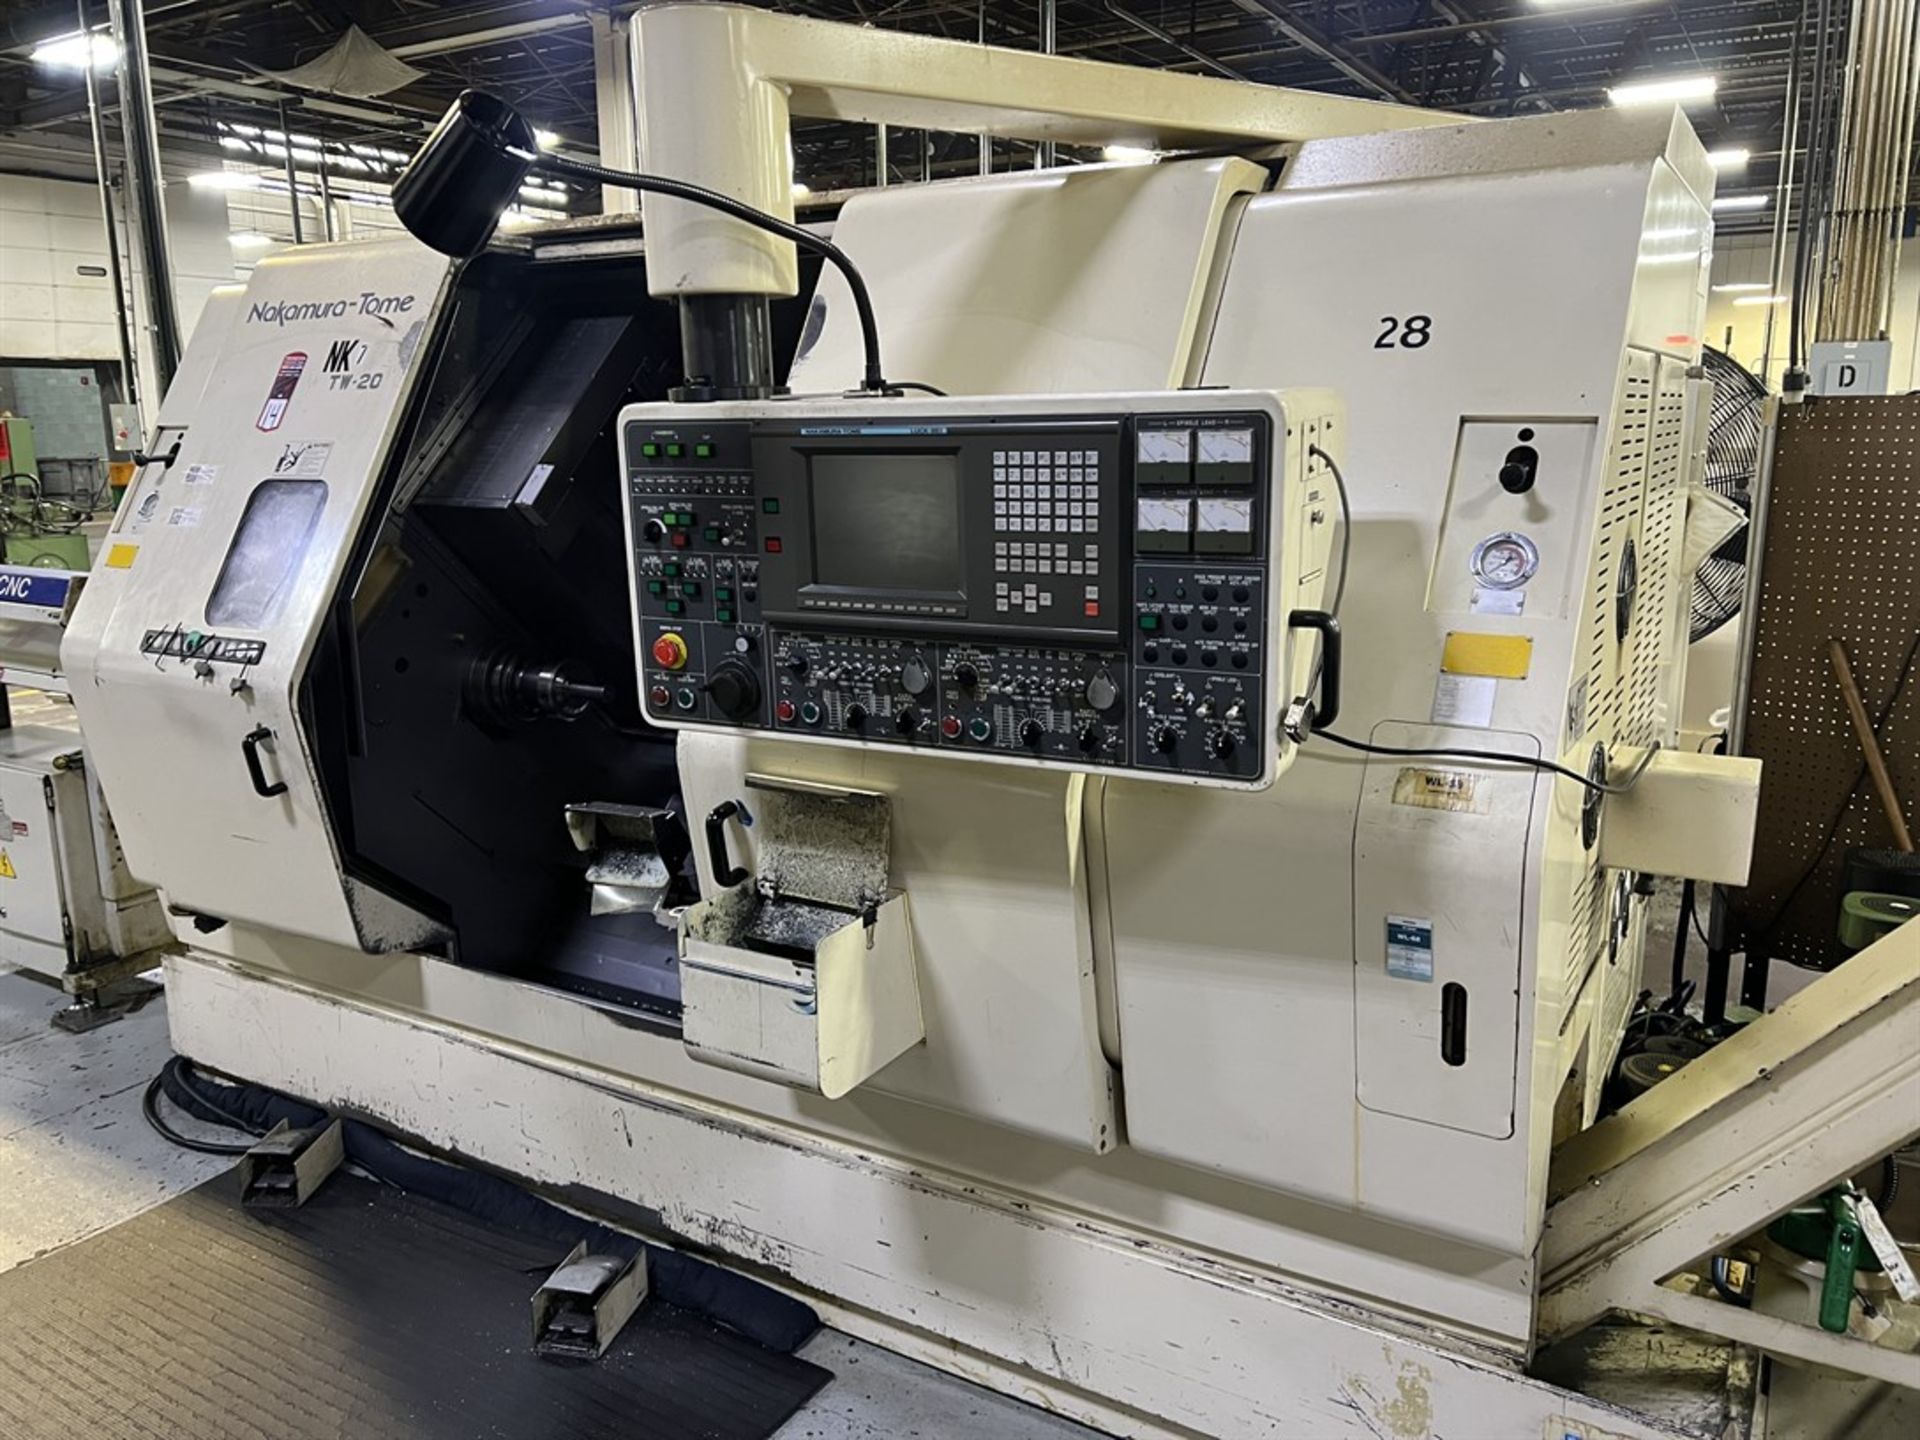 NAKAMURA-TOME TW-20 CNC Opposed Spindle Turning Center, s/n (2), Nakamura-Tome LUCK-BEI Controls, - Image 2 of 11